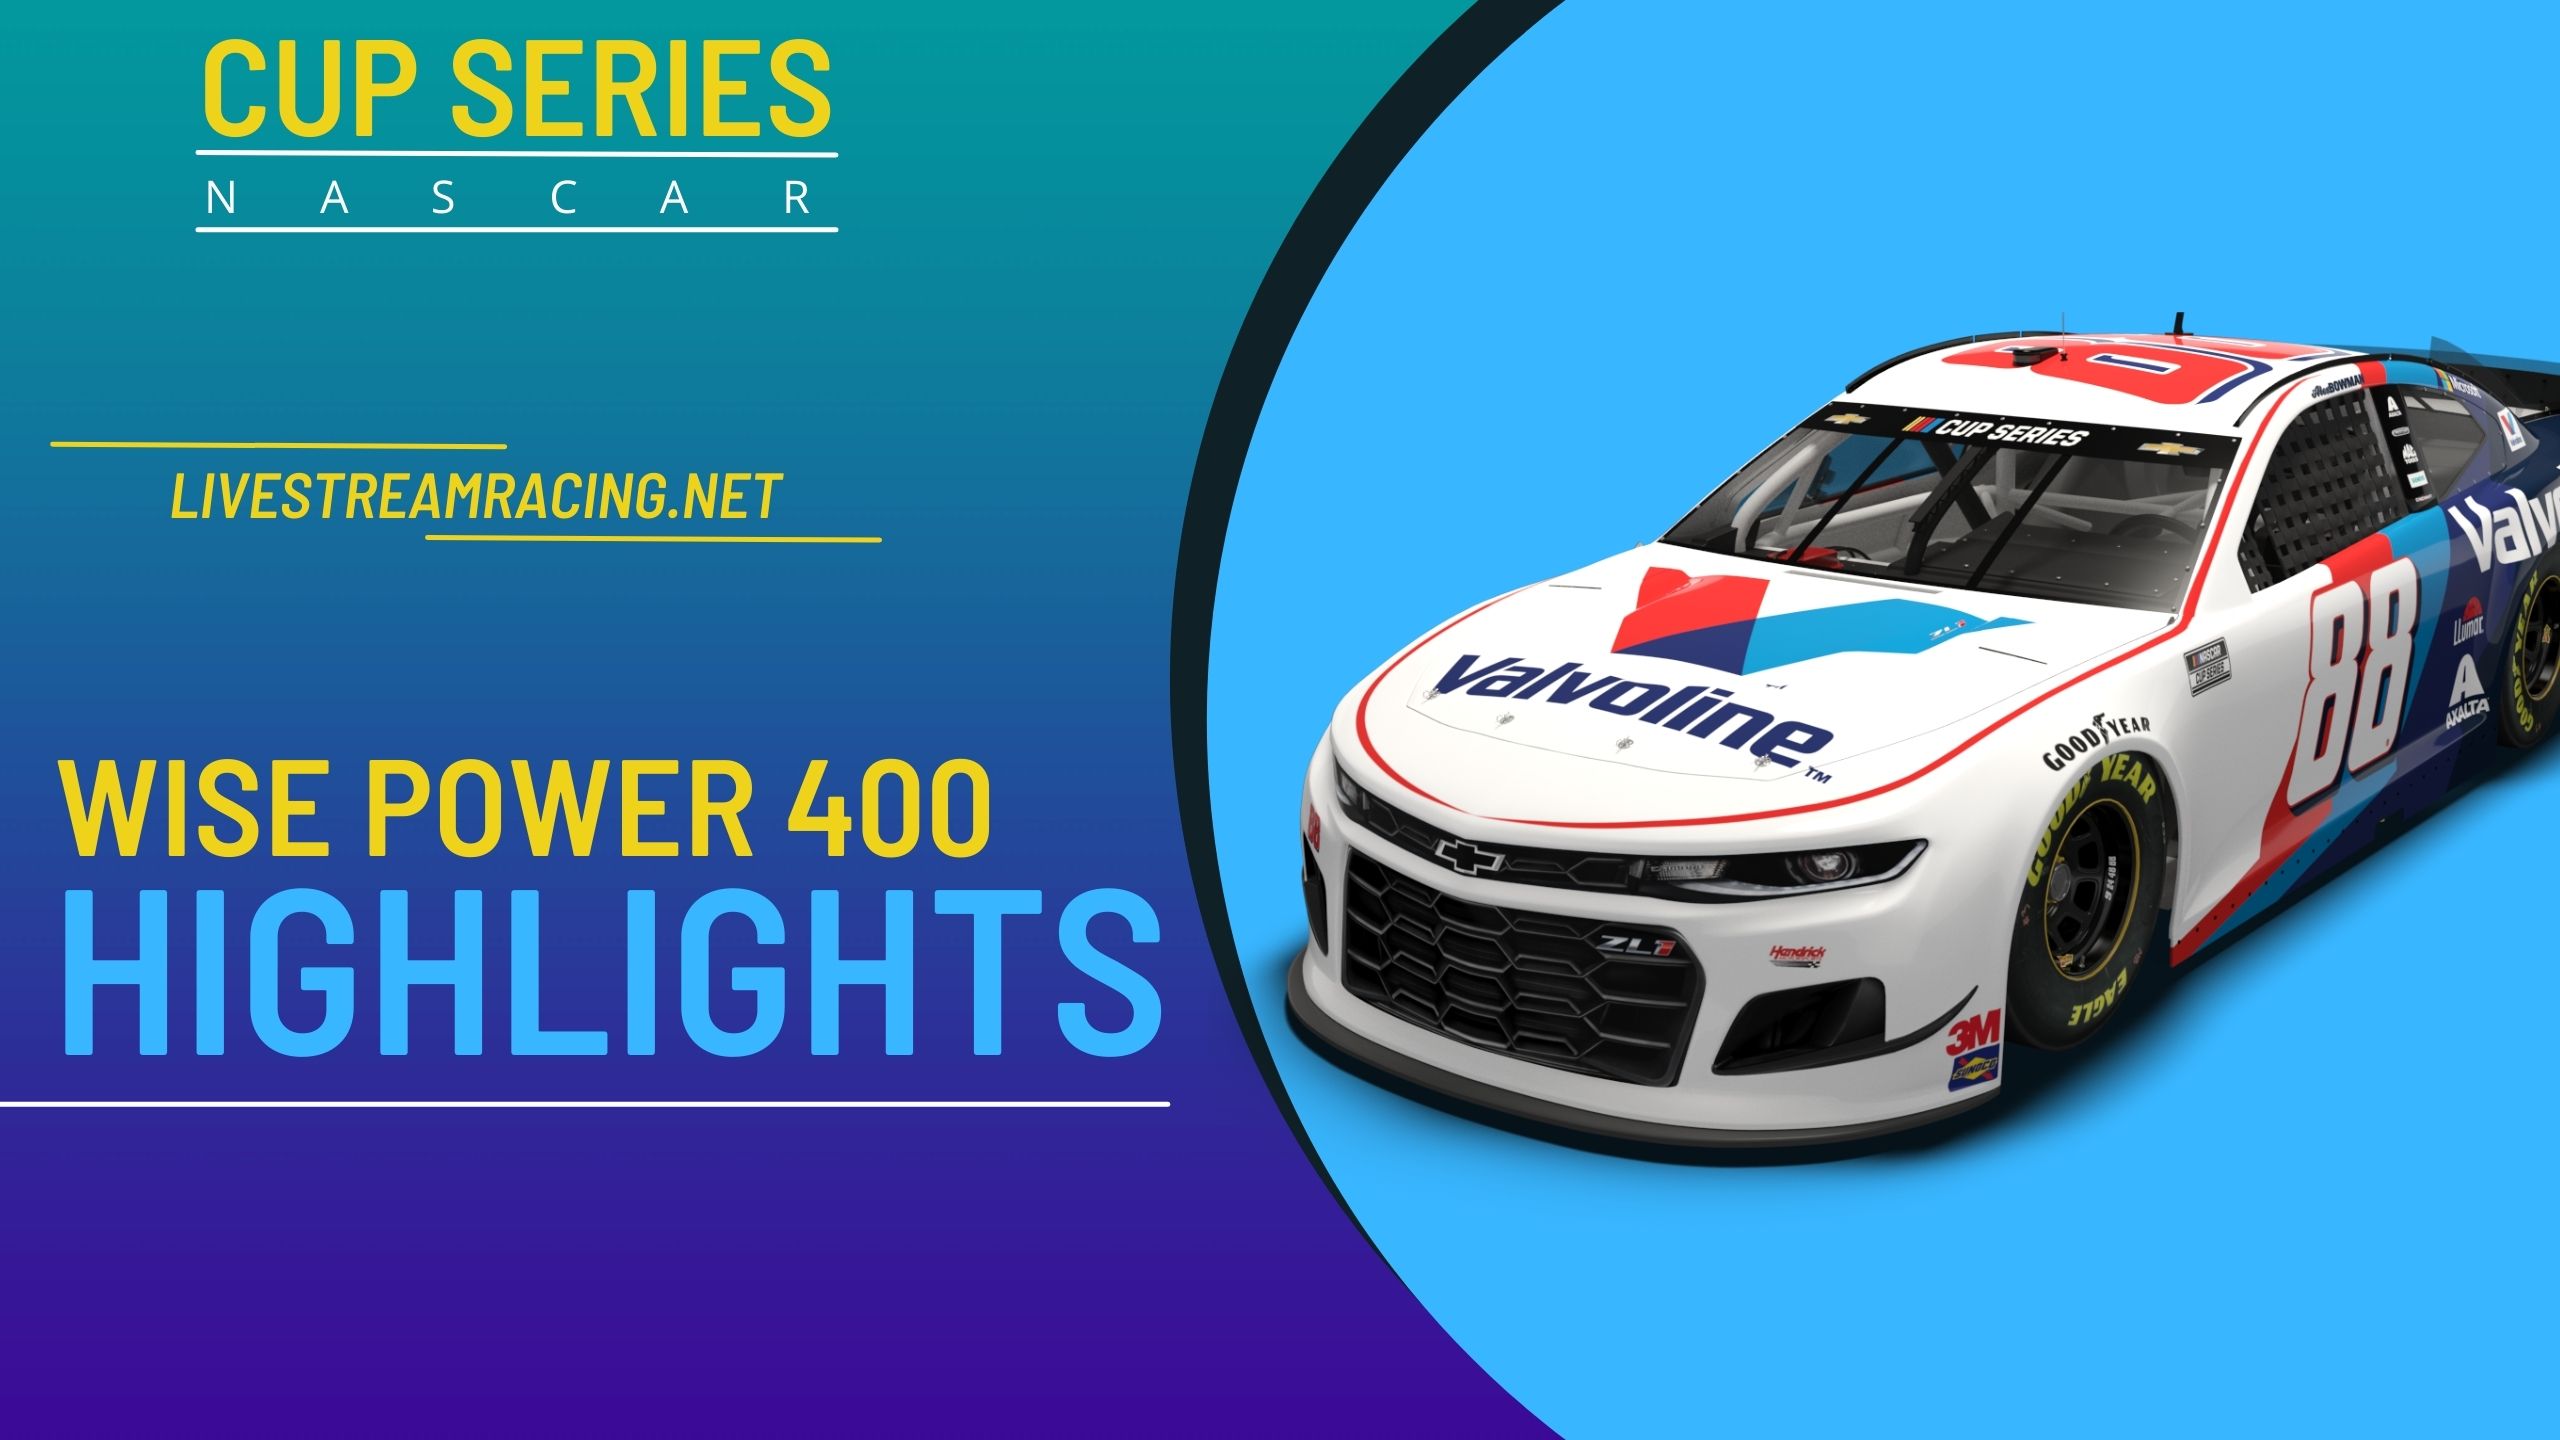 Wise Power 400 Nascar Highlights 2022 Cup Series